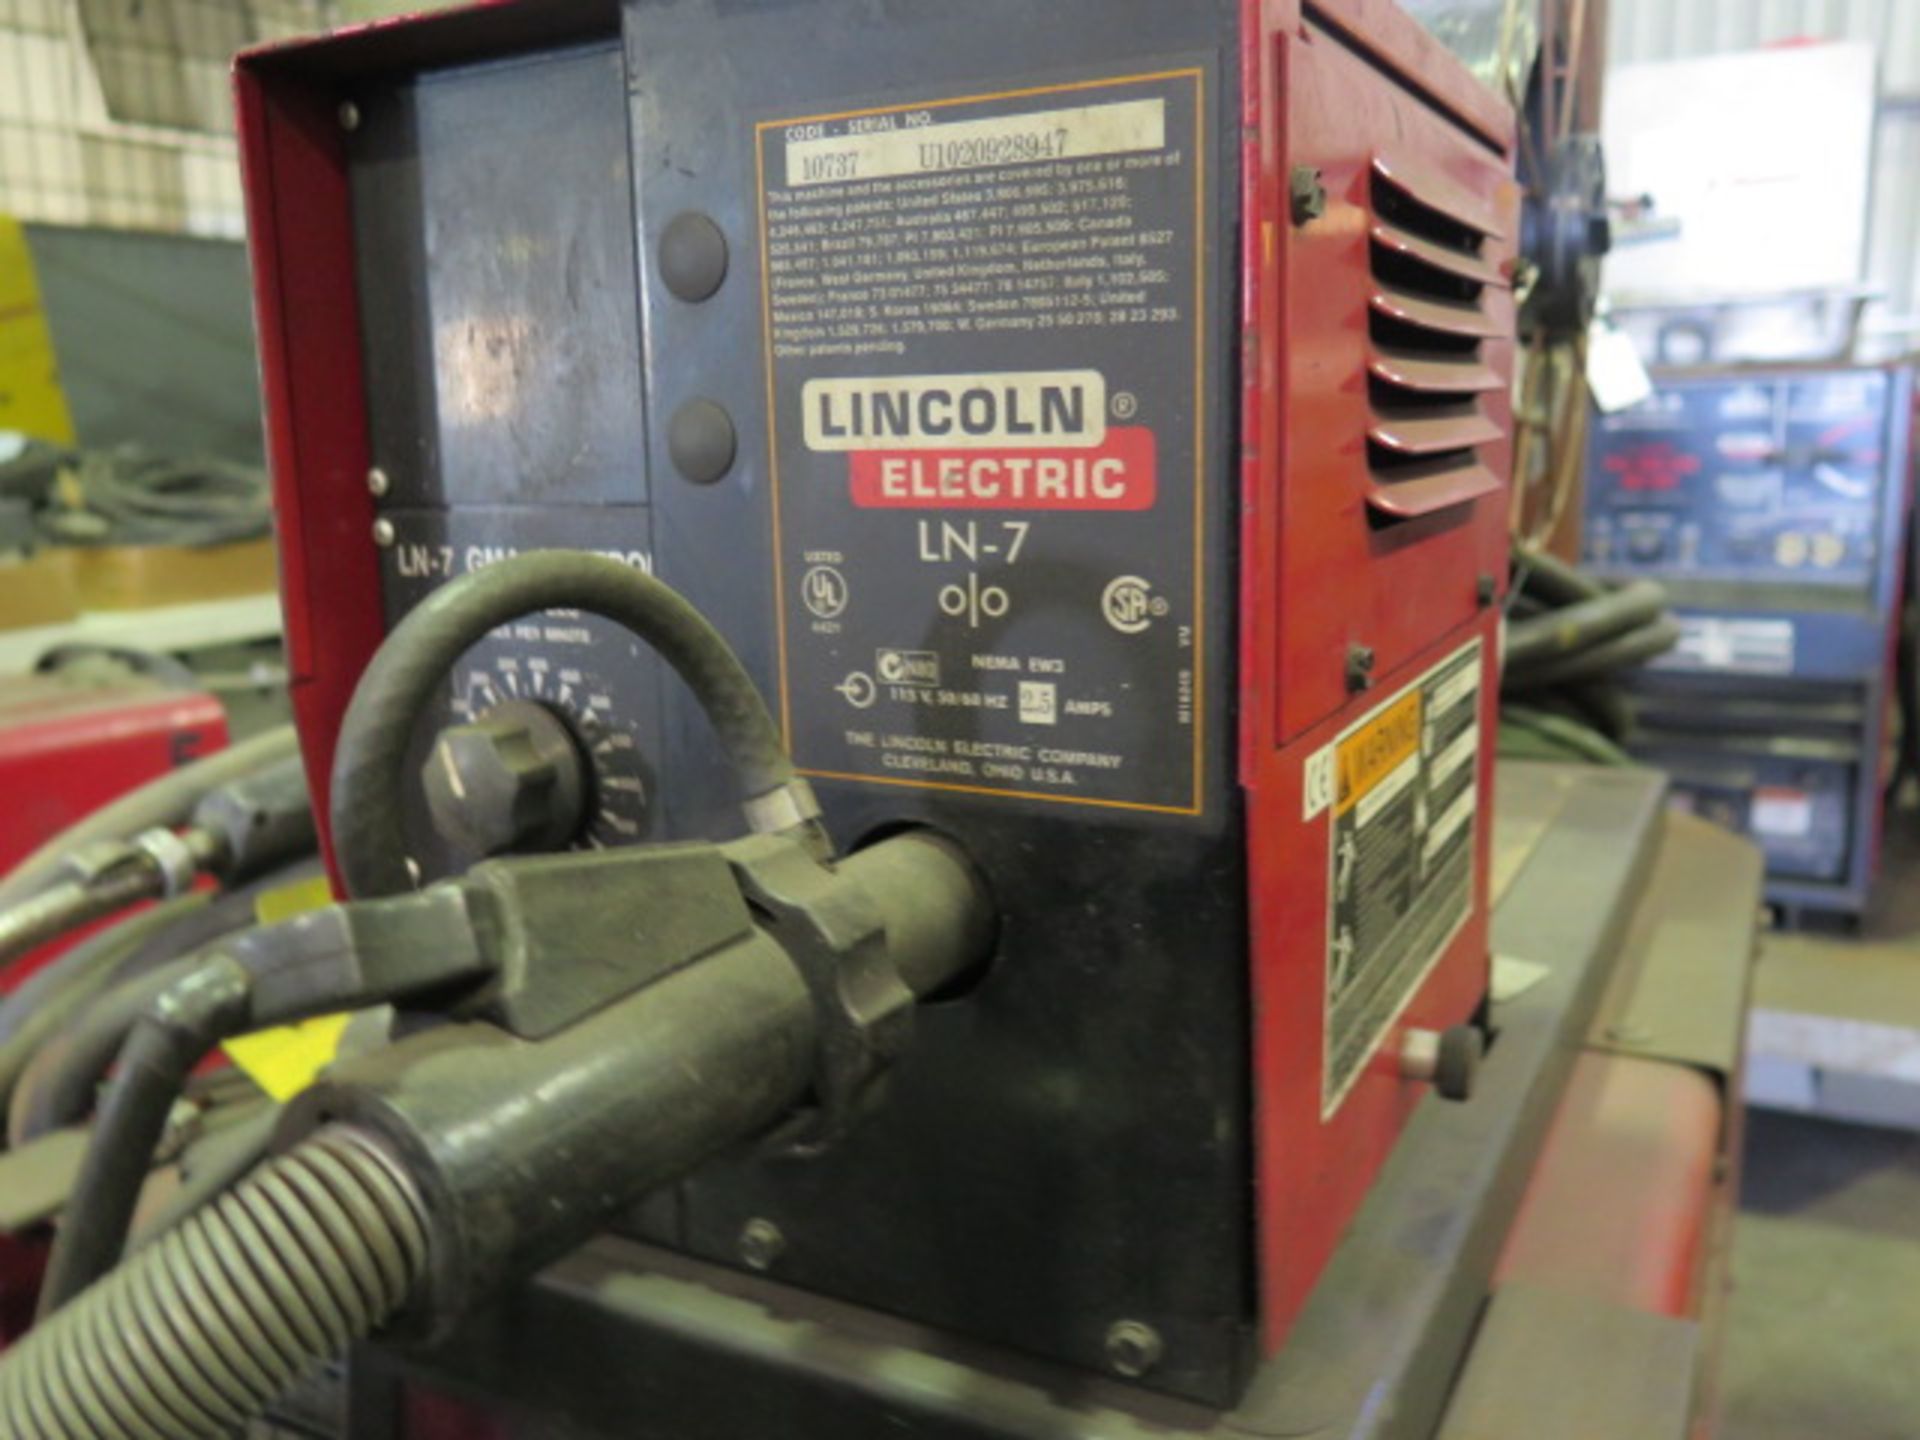 Lincoln CV-300 Arc Welding Power Source w/ Lincoln LN-7 Wire Feed (SOLD AS-IS - NO WARRANTY) - Image 6 of 12